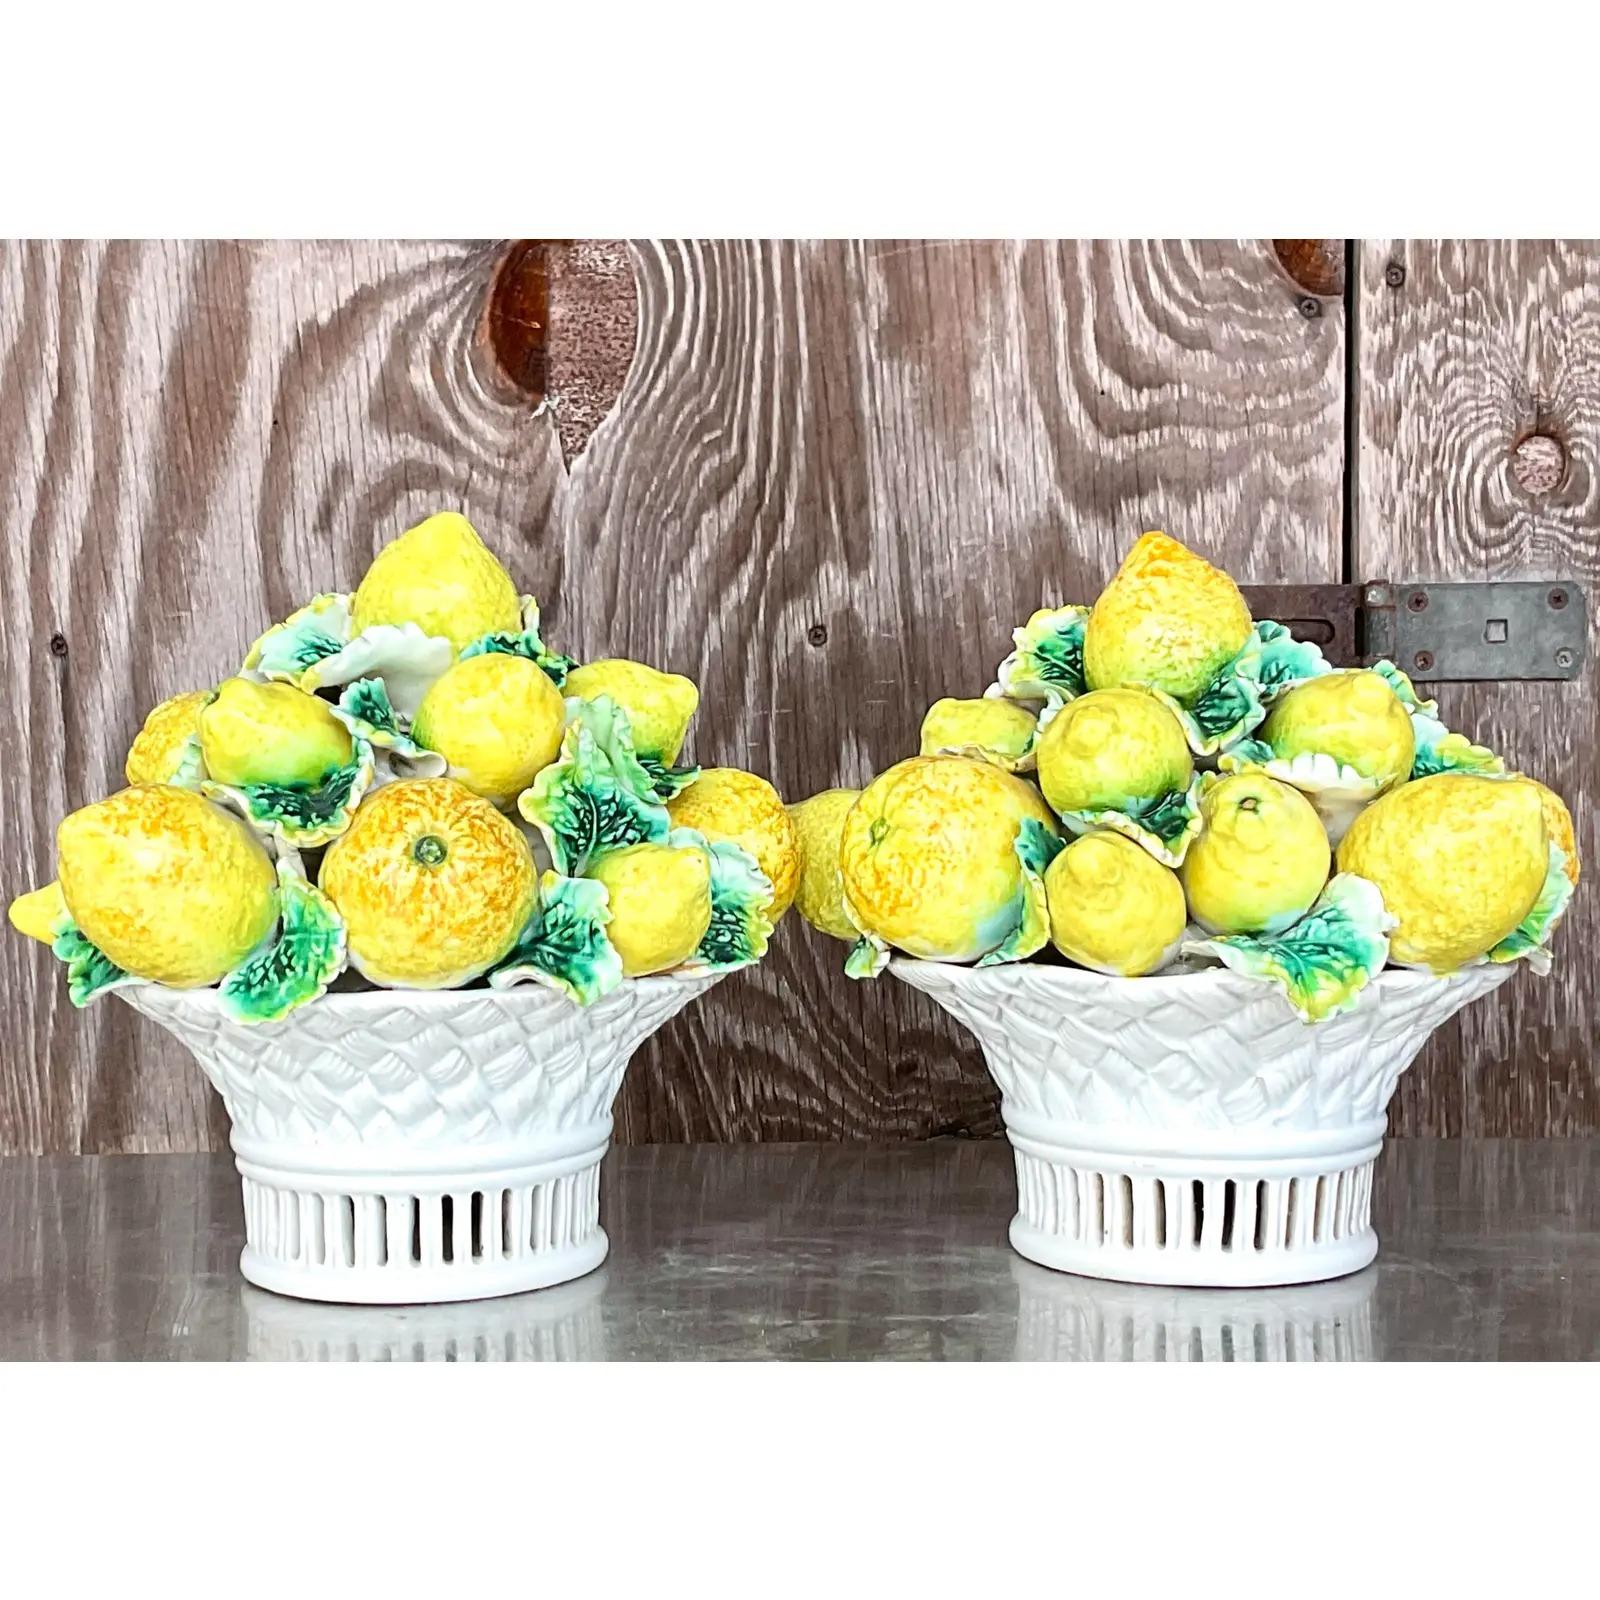 A fantastic pair of vintage glazed ceramic centerpiece basket. A chic Italian lemon topiary with beautiful attention to details. Gorgeous colors. Marked on the bottom. Acquired from a Palm Beach estate.